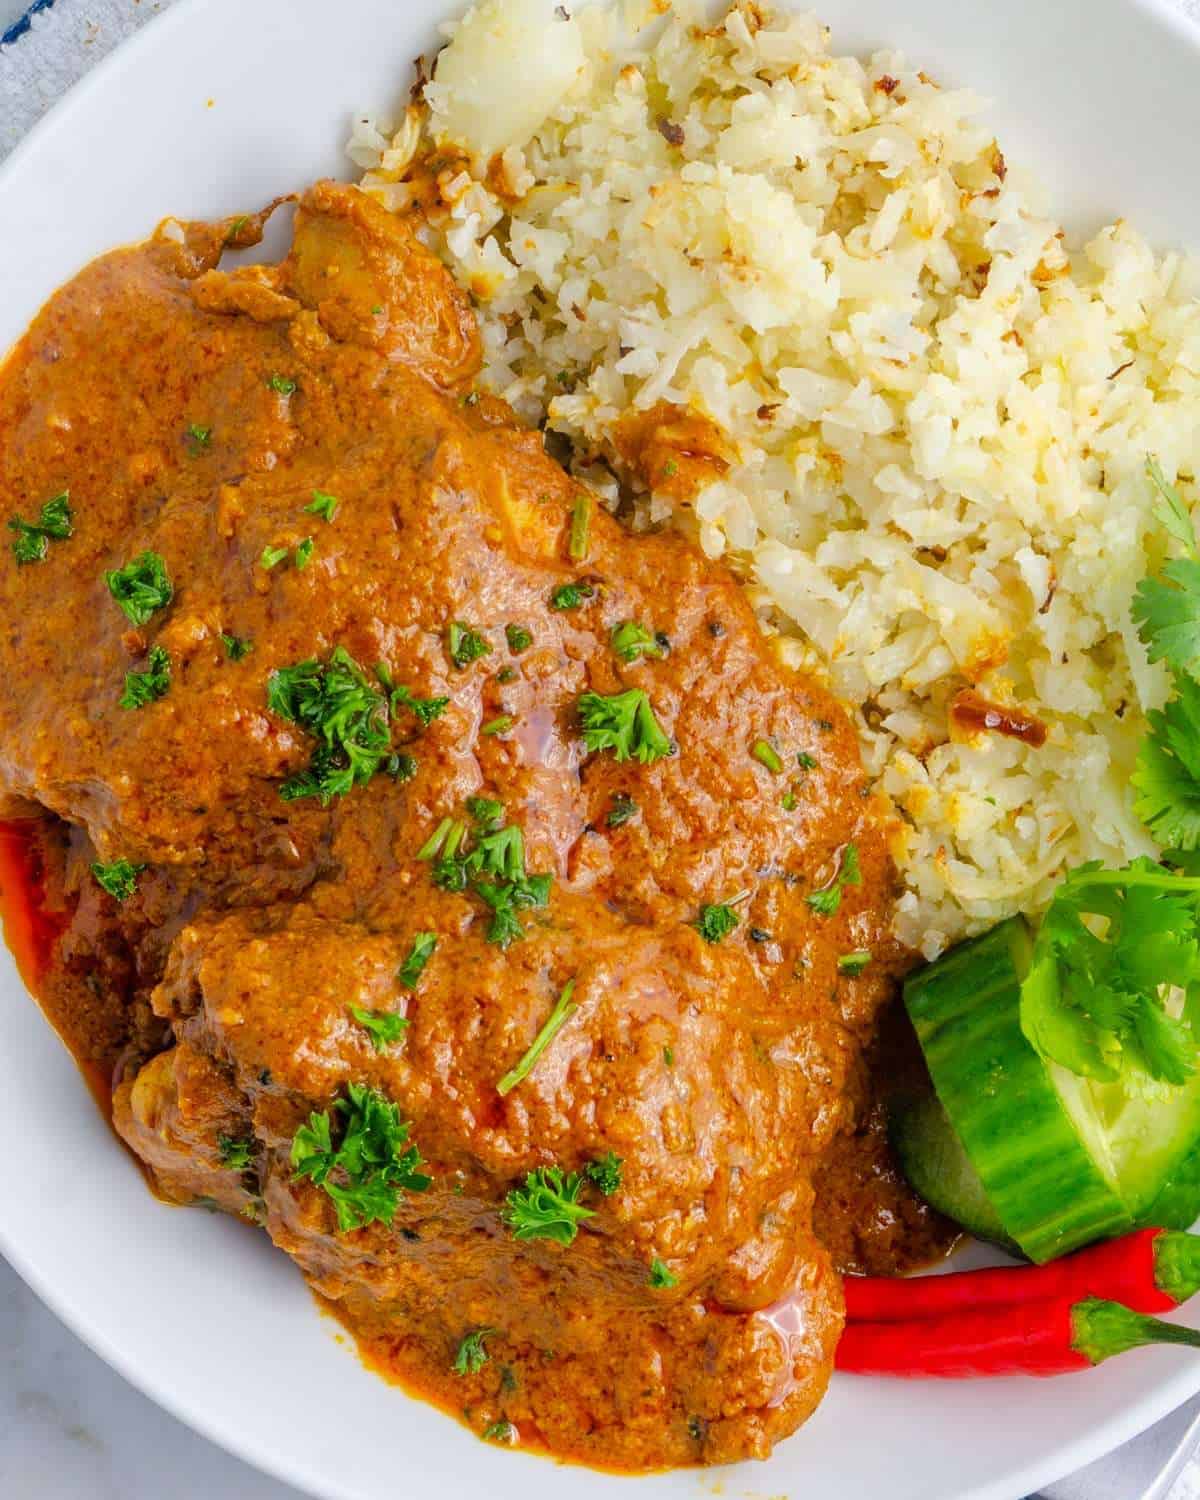 Spicy Keto Butter chicken meal with cauli rice and garnish